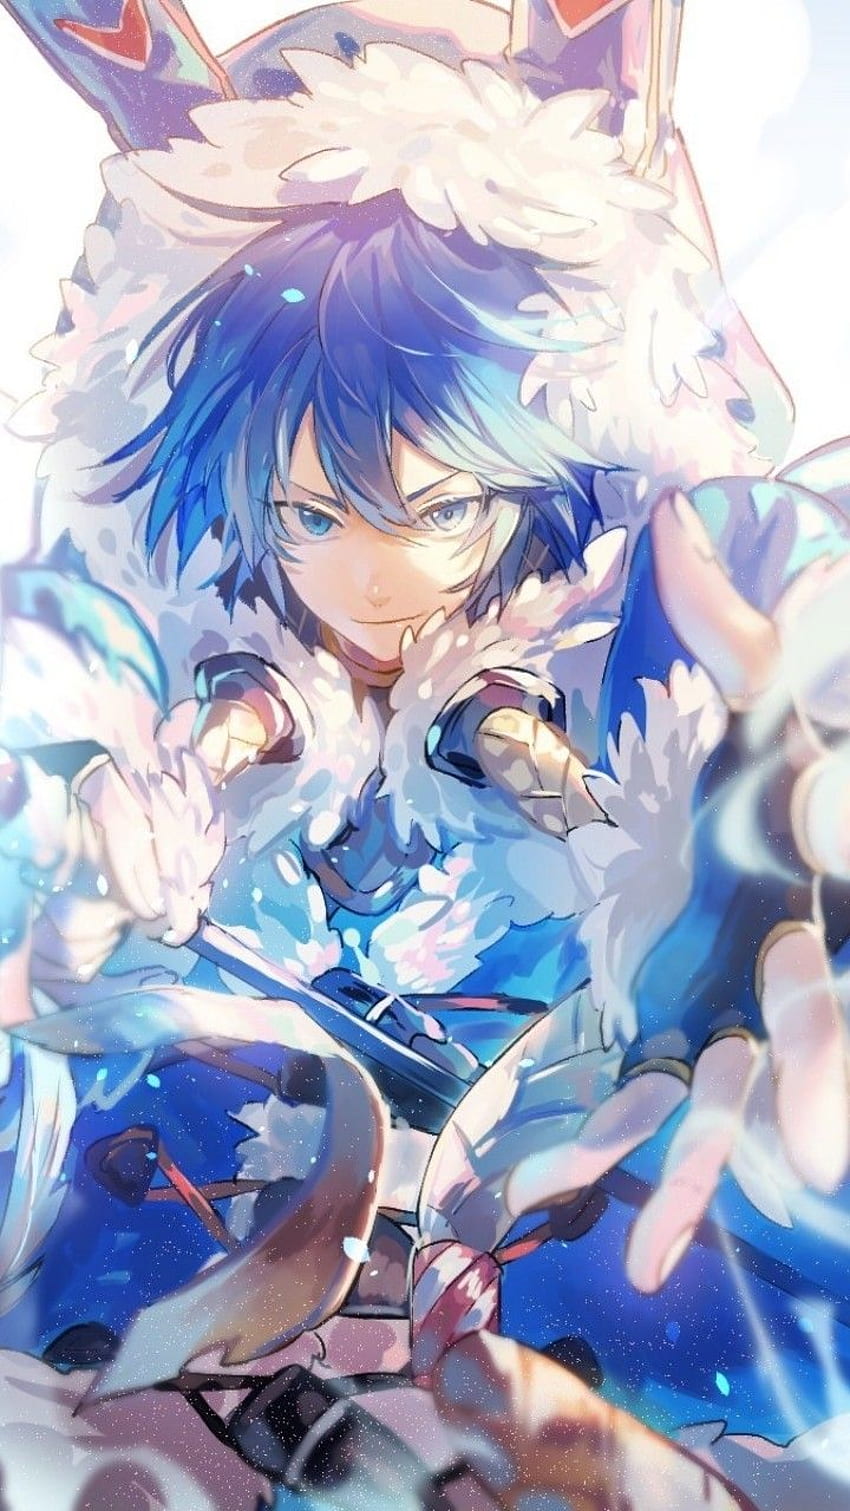 Anime Boy With Blue Hair Search Result Cliparts For  Nata Closers  Free  Transparent PNG Download  PNGkey